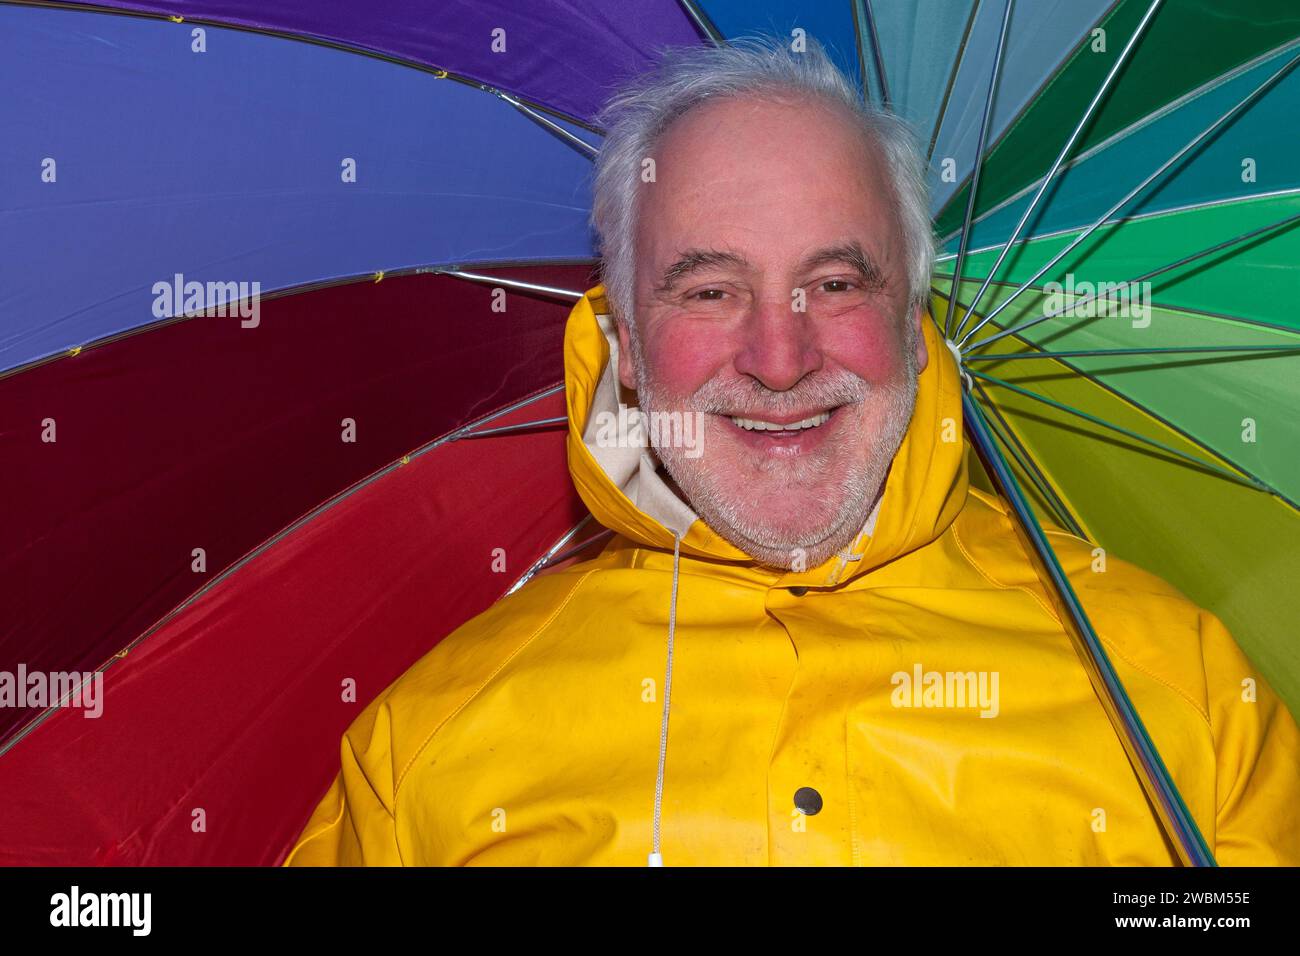 In a good mood despite bad weather, a smiling senior in a yellow rain jacket and a colorful umbrella radiates joy. Stock Photo